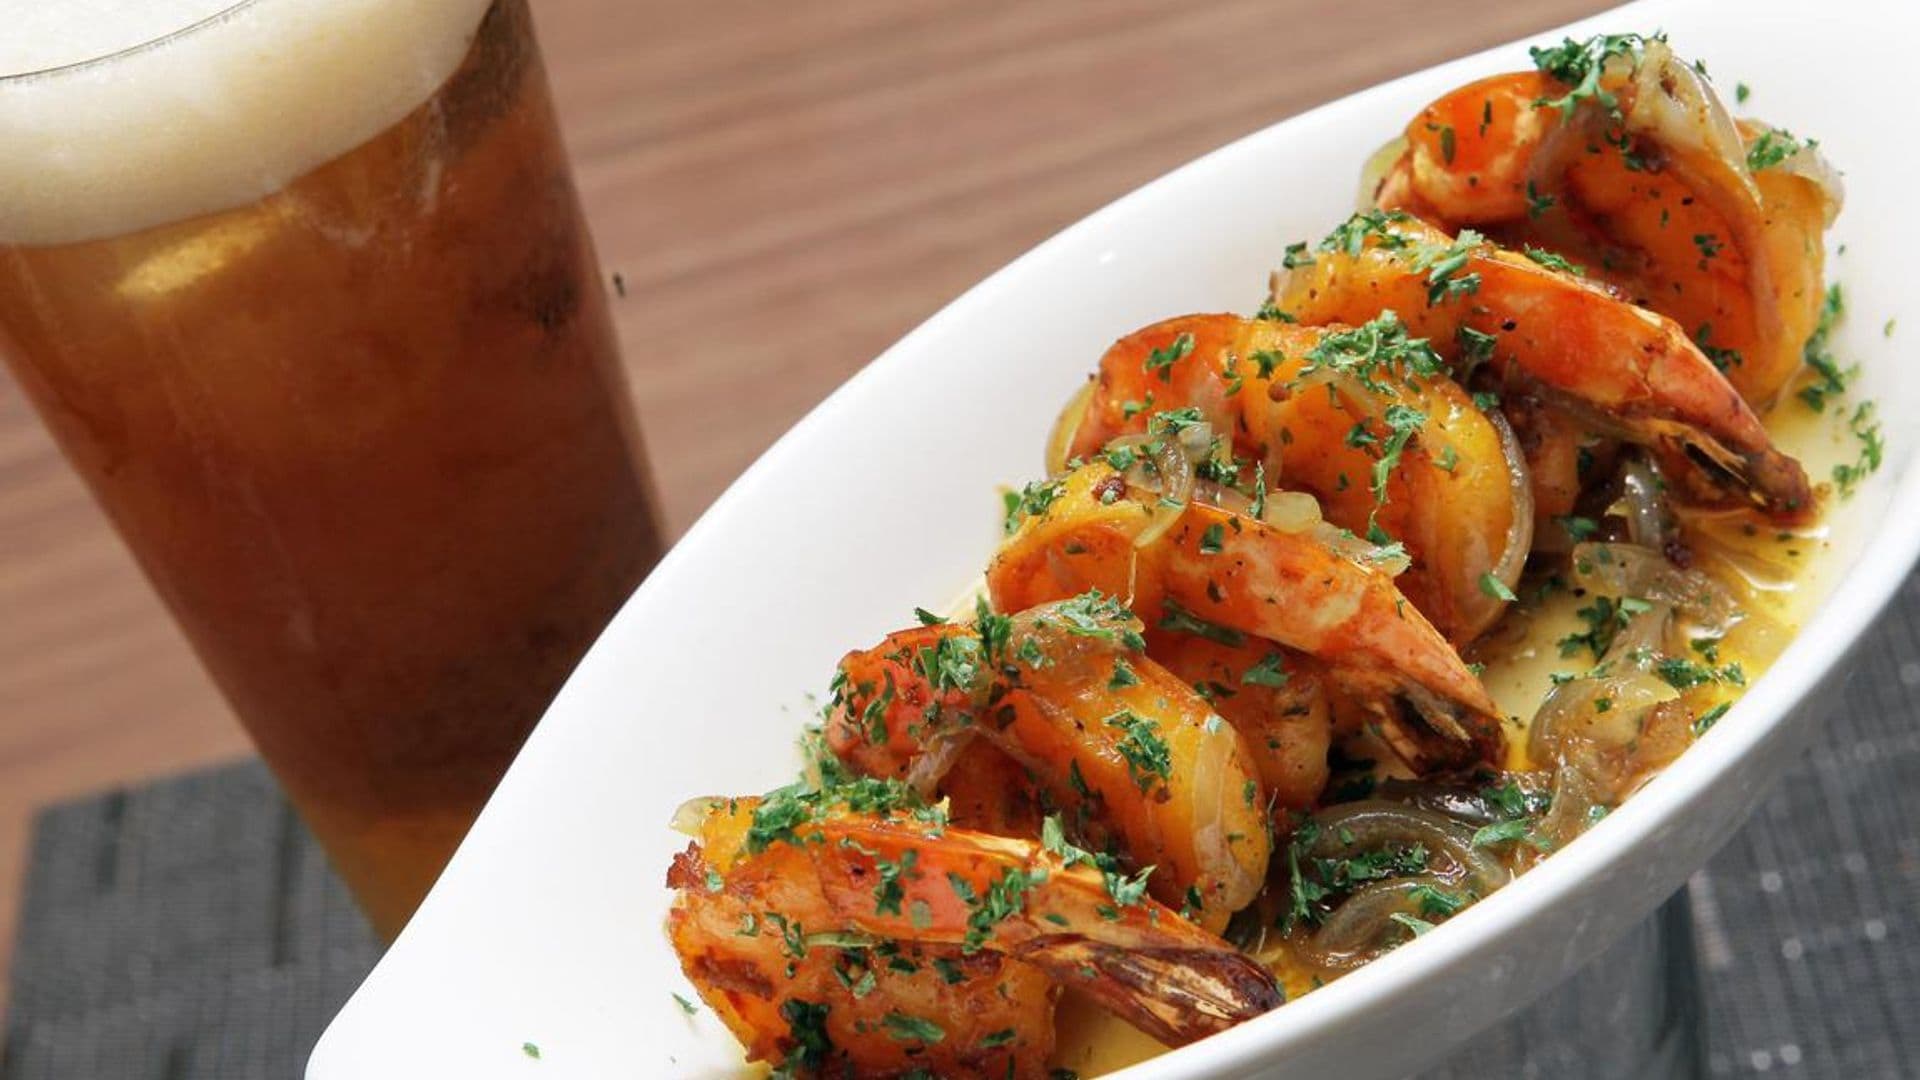 Classic Spanish recipe, Gambas al ajillo, is deliciously flavorful and only takes minutes